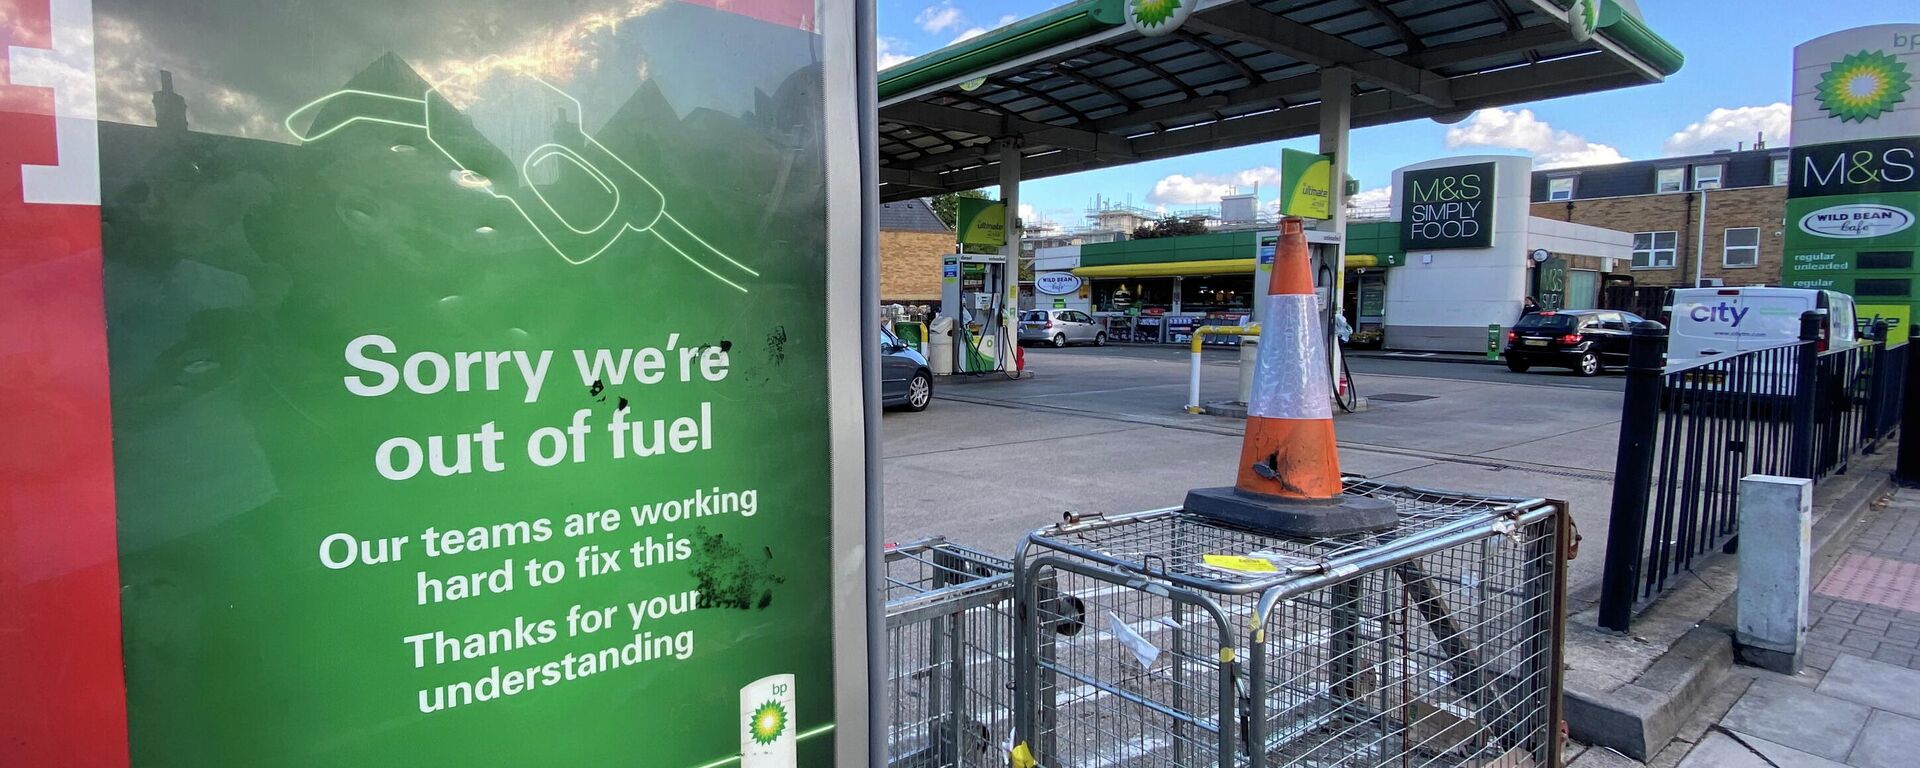 A BP petrol station that has run out of fuel is seen in south London, Britain - Sputnik International, 1920, 28.09.2021